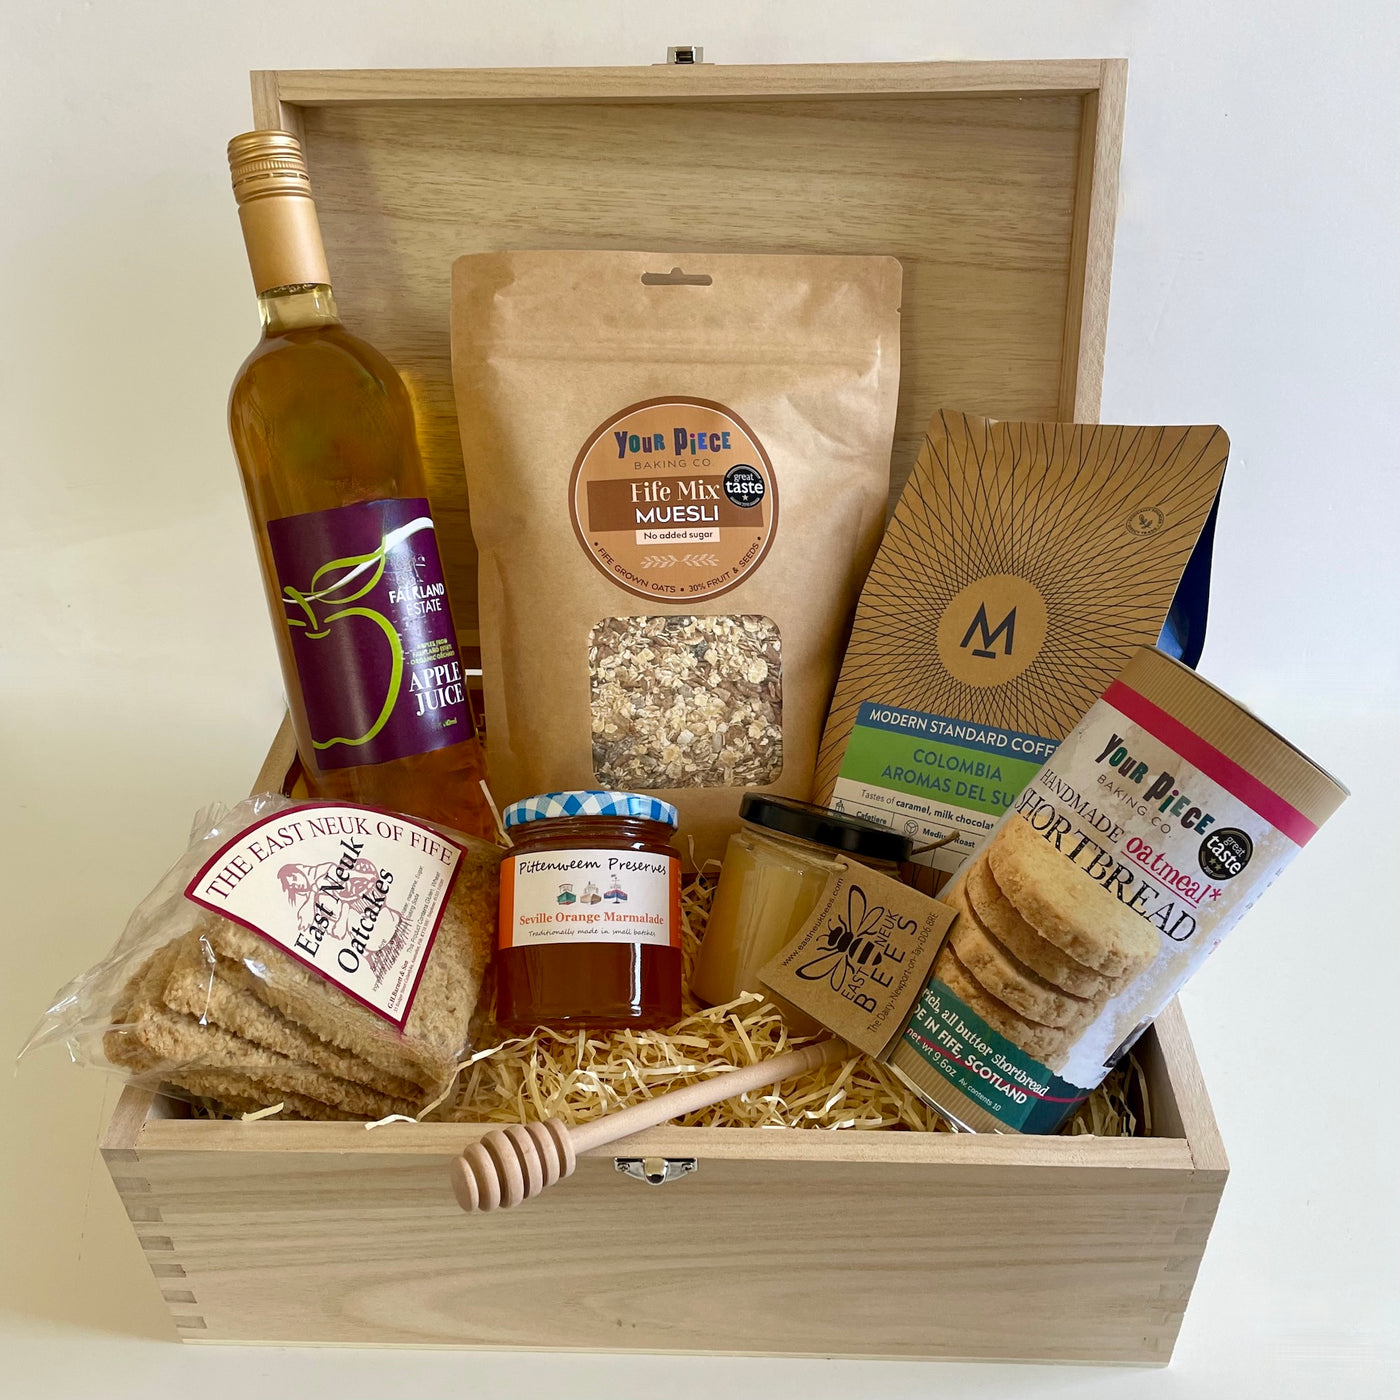 Tastes of Fife Hamper from The St Andrews Hamper Company, with seven tasty eco and organic products made by artisan producers, plus a keepsake wooden tuck box and honey dipper.